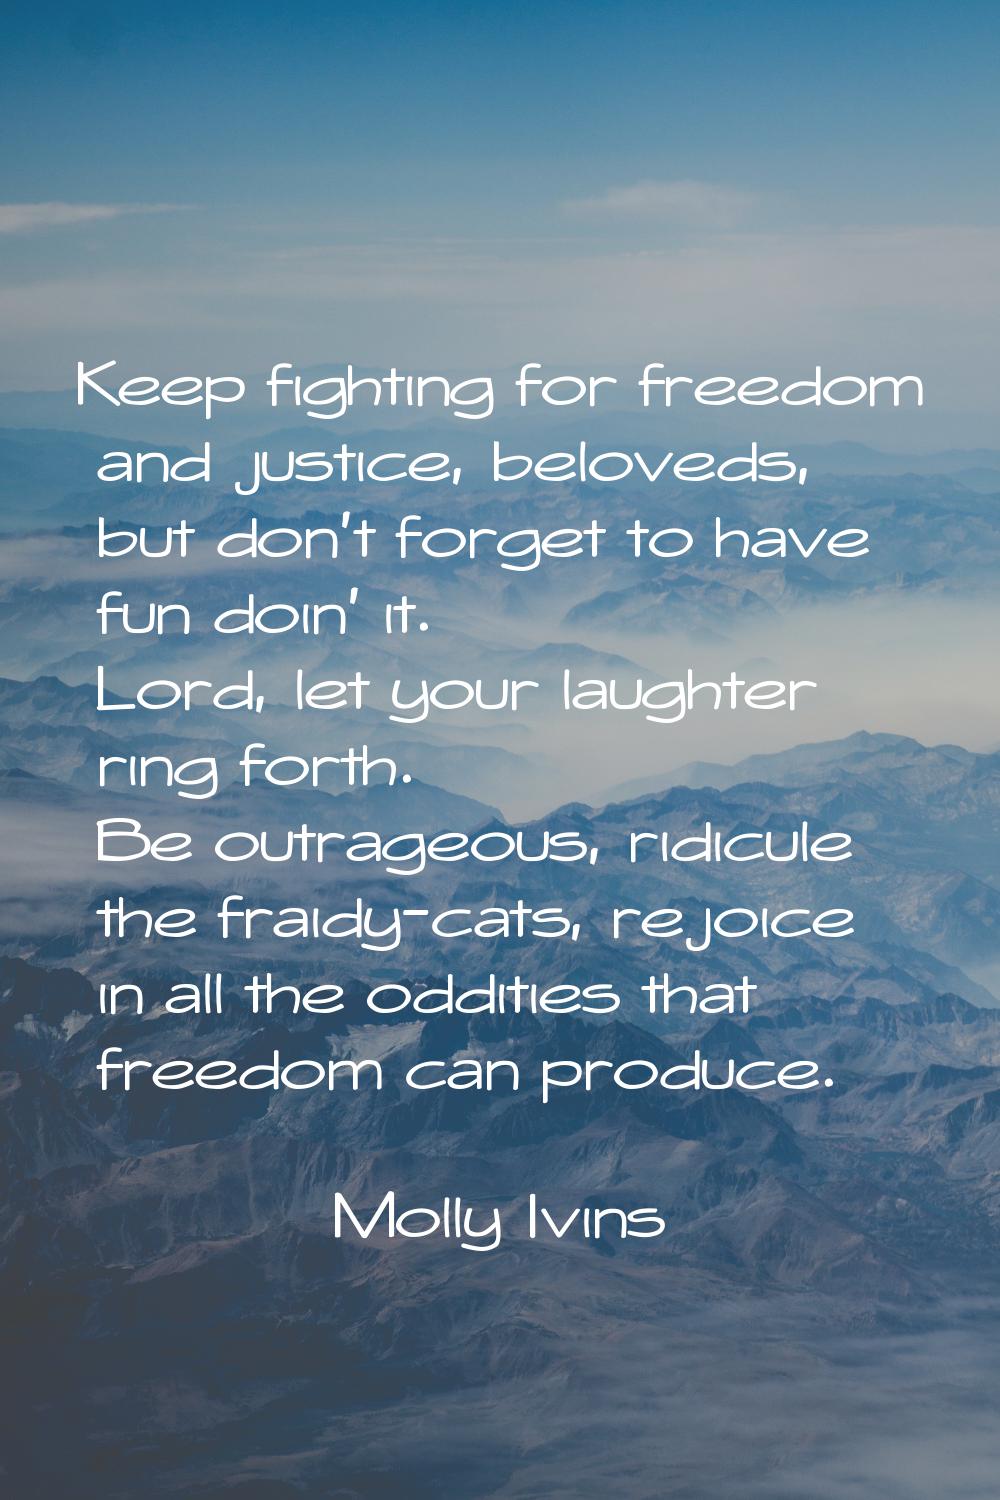 Keep fighting for freedom and justice, beloveds, but don't forget to have fun doin' it. Lord, let y